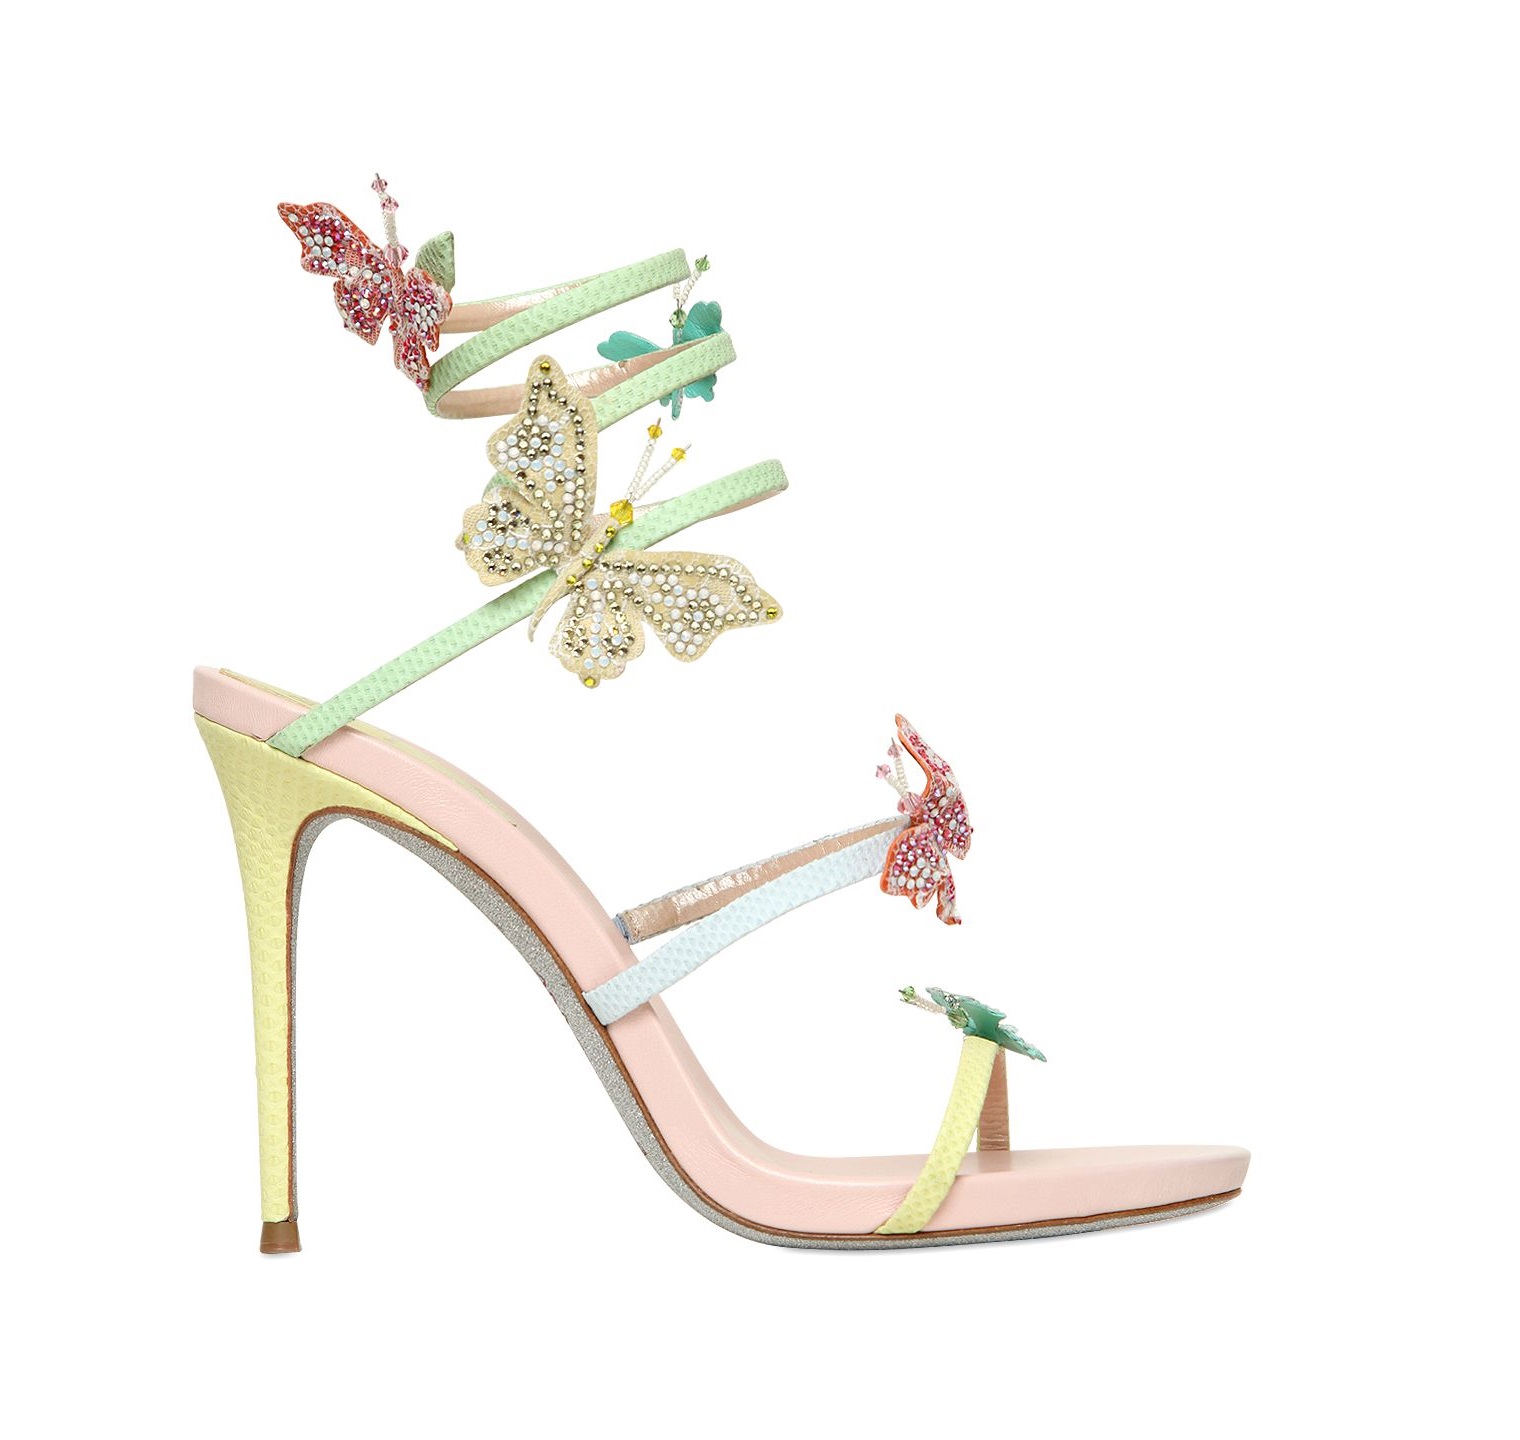 Whimsical Wednesday : Rene Caovilla Butterfly Heels